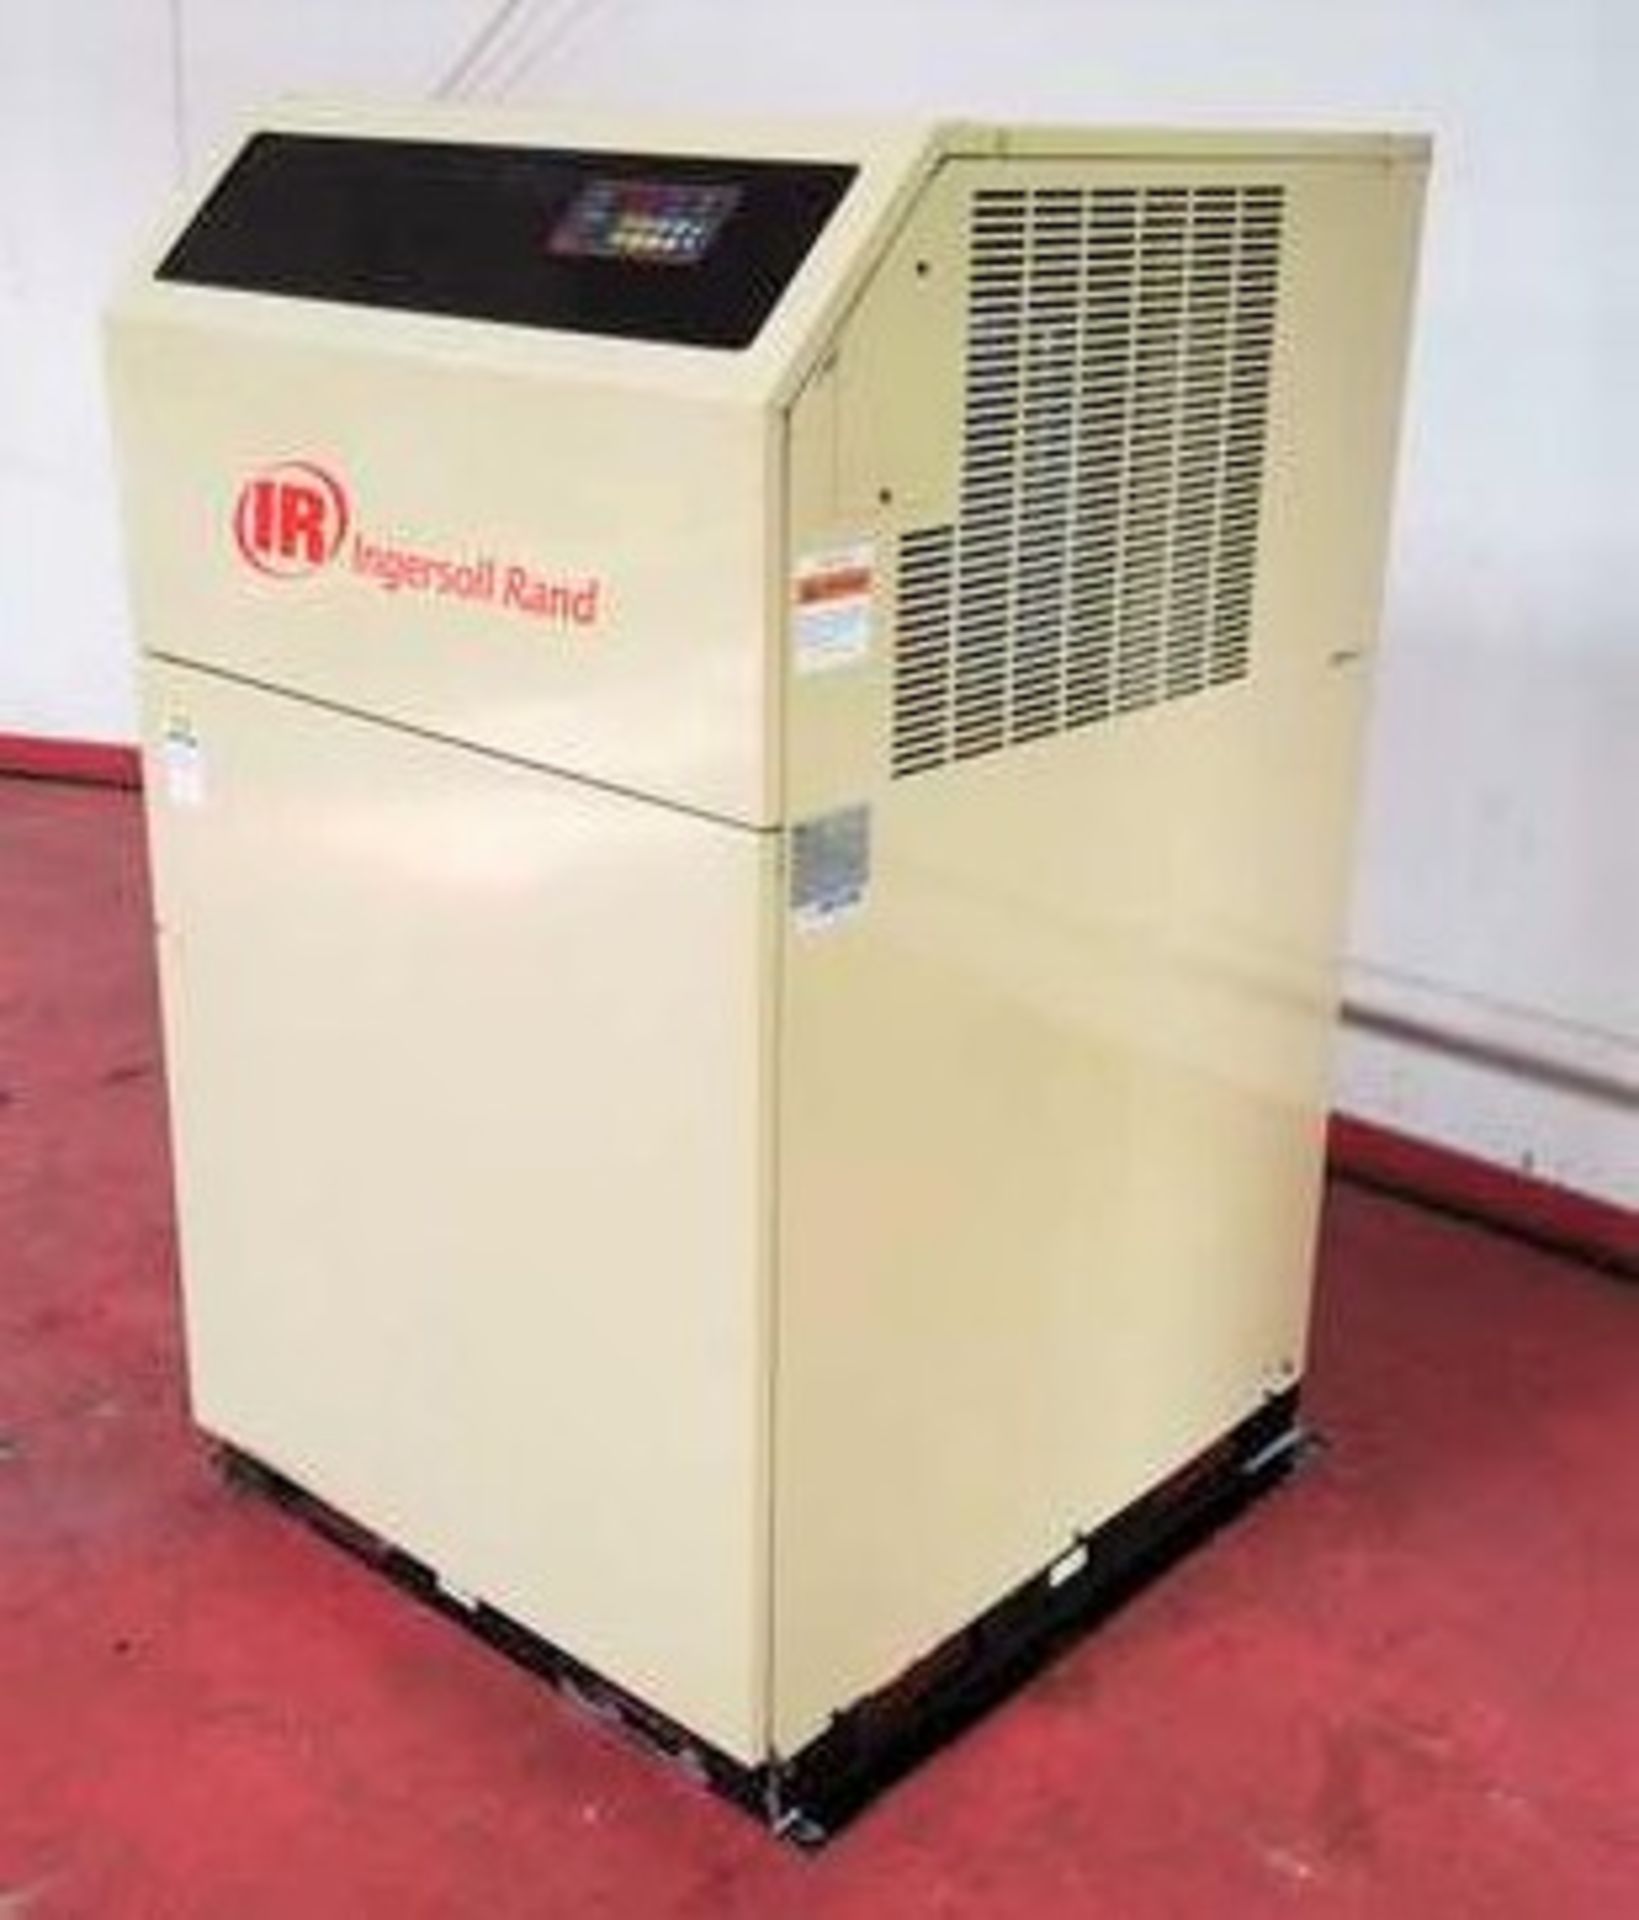 Ingersol Rand Air Dryer. Installed, run less than one month and removed. Mdl: NVC500A40N. S/N